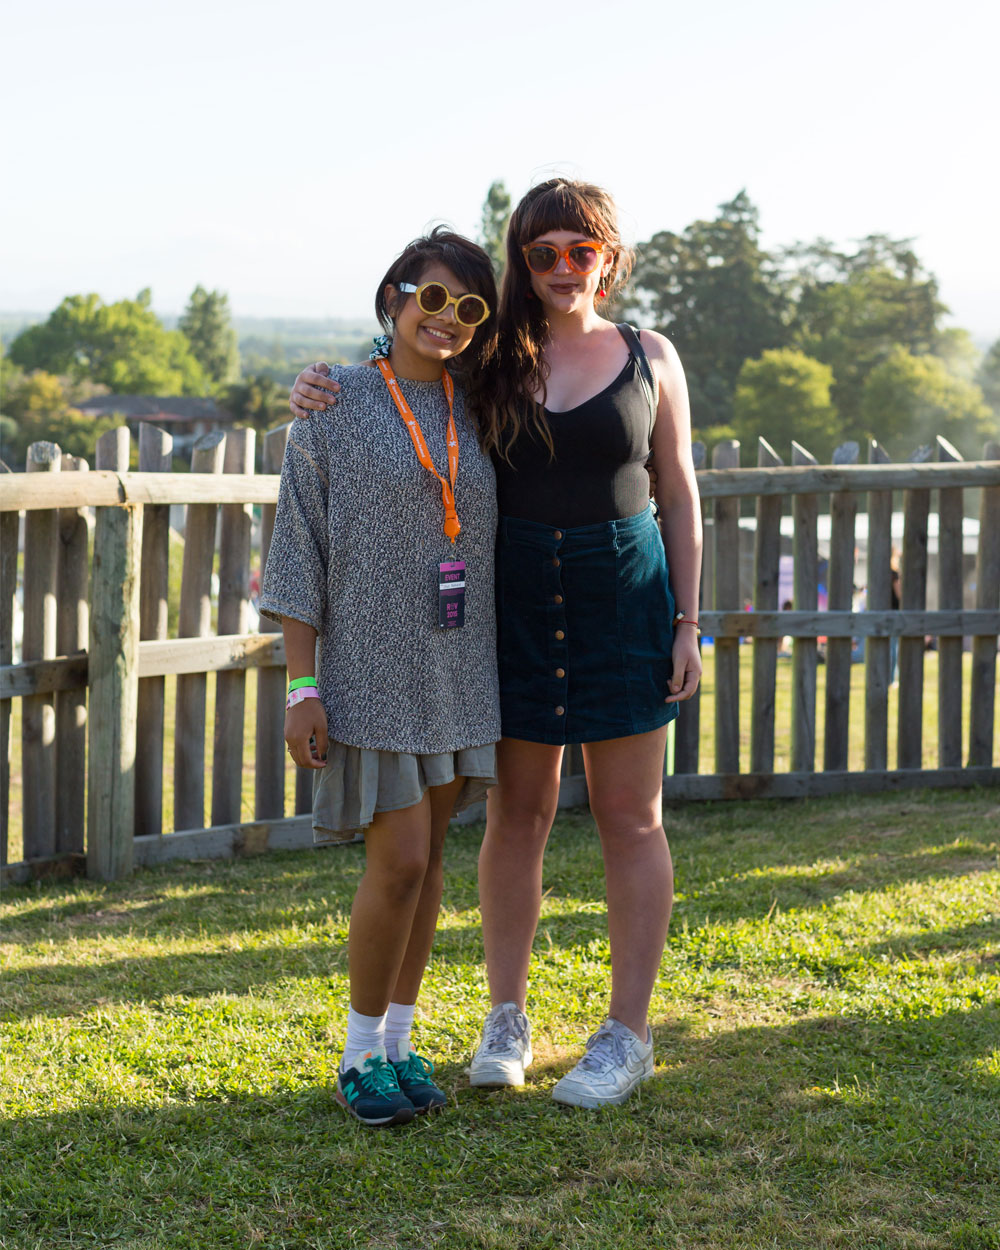 Louise and Skye at Rhythm and Vines 2016